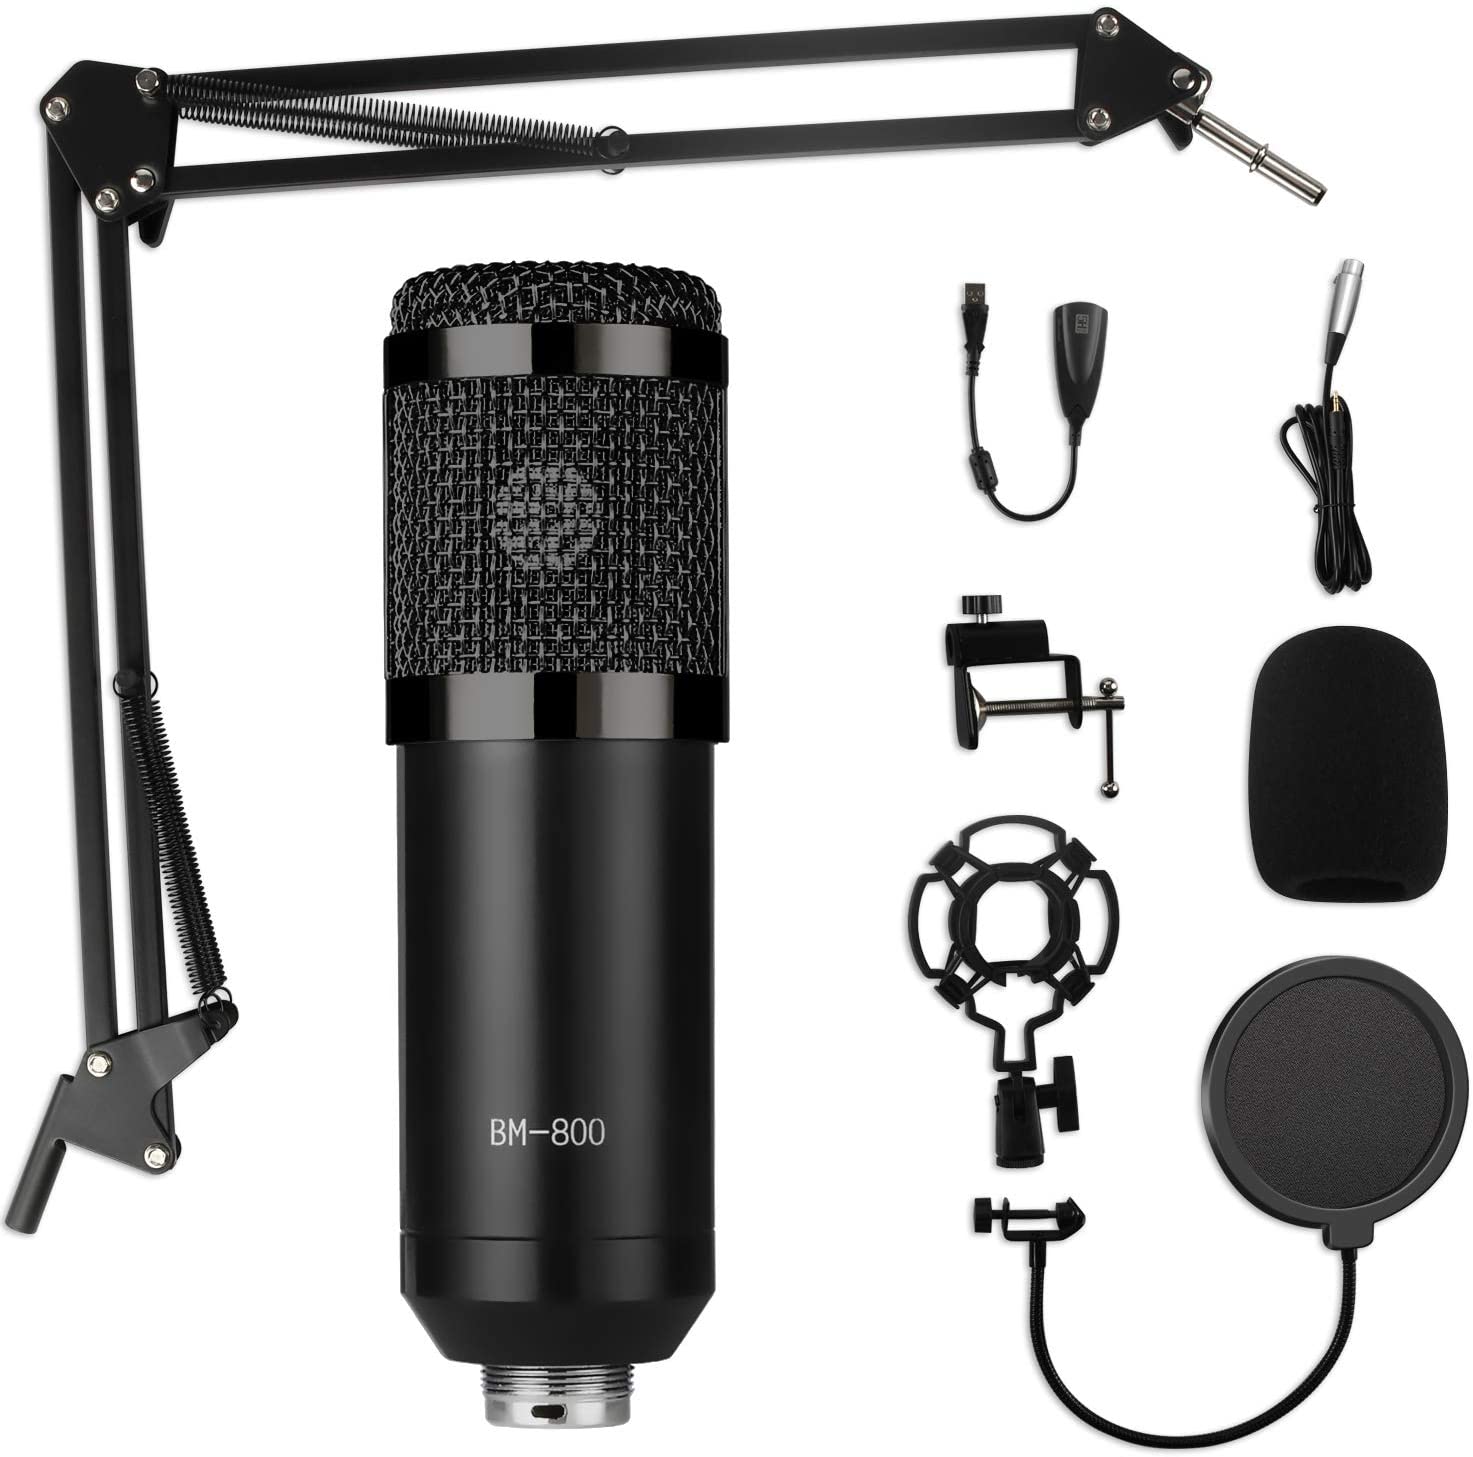 Rybozen Multipurpose Condenser Microphone Bundle Kit, Professional Cardioid Studio Mic Set with Mic Suspension Scissor Arm Stand Shock Mount for Recording Podcasting Karaoke Gaming Streaming YouTube (